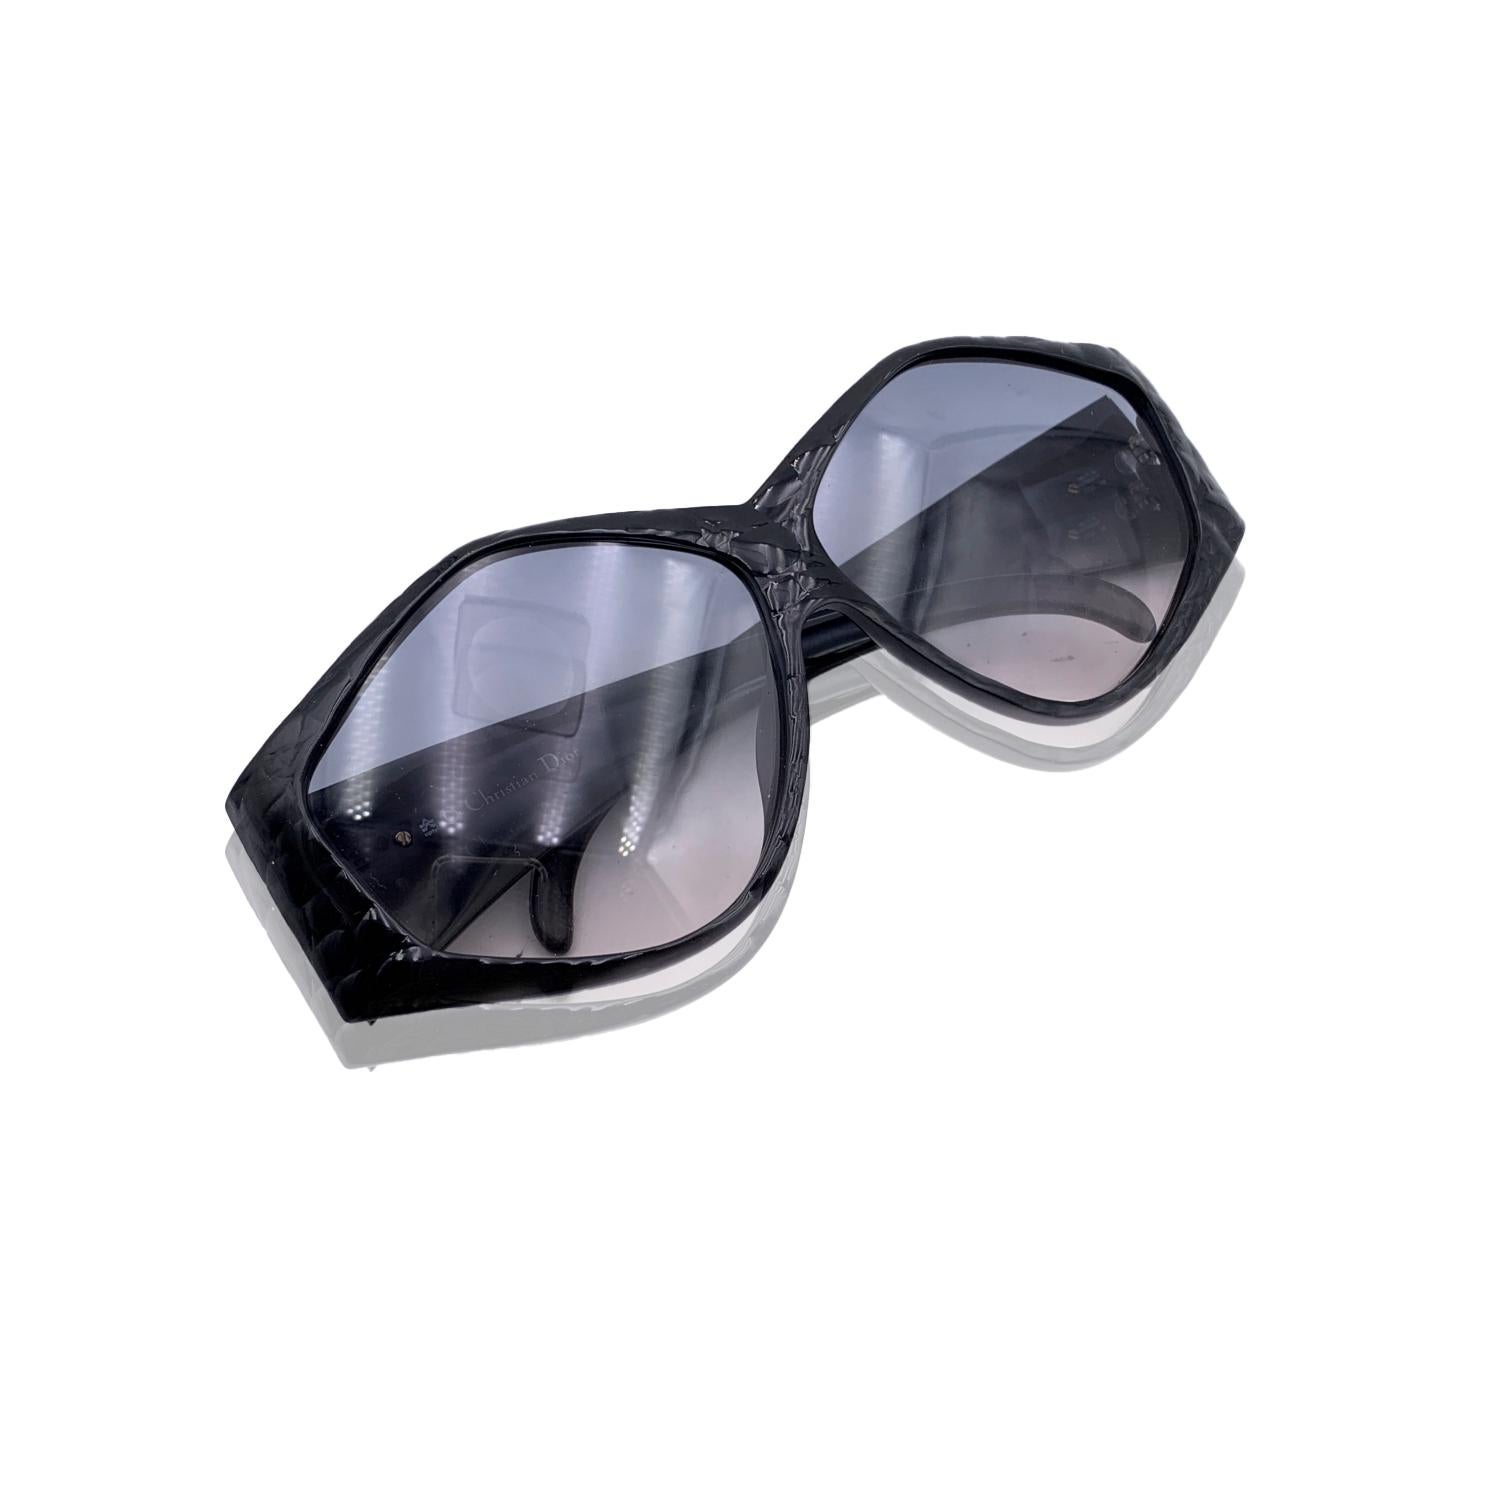 Vintage sunglasses by CHRISTIAN DIOR, mod. 2230 - 90. Black embossed OPTYL frame. CD logo on temple. Gradient red 100% UV protection lenses. Made in Germany.

Details

MATERIAL: Acetate

COLOR: Black

MODEL: 2230

GENDER: Women

COUNTRY OF